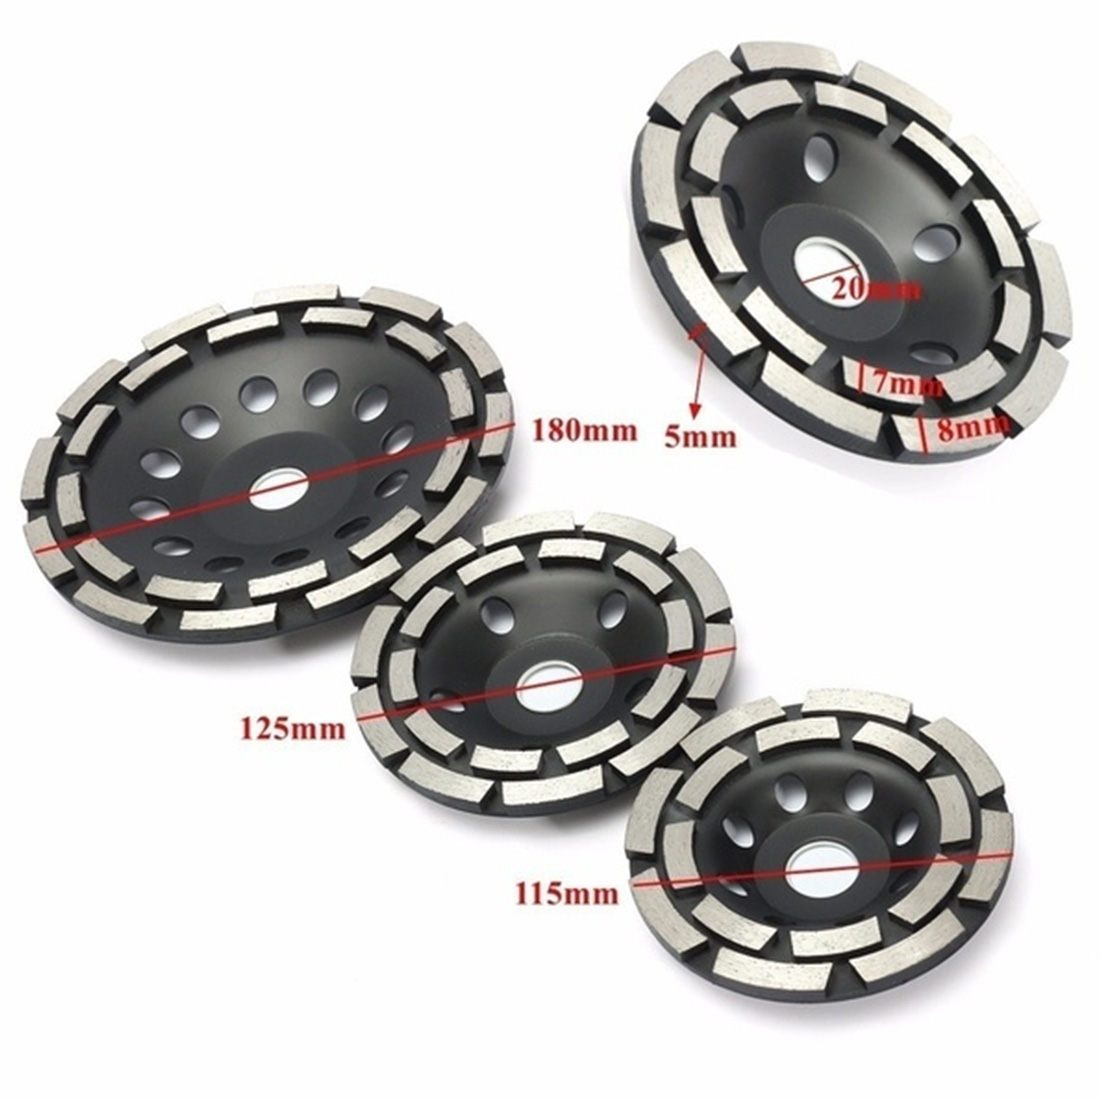 Diamond Grinding Disc Abrasives Concrete Tools Grinder Wheel Metalworking Cutting Grinding Wheels Cup Saw Blade 115mm 125mm 180m